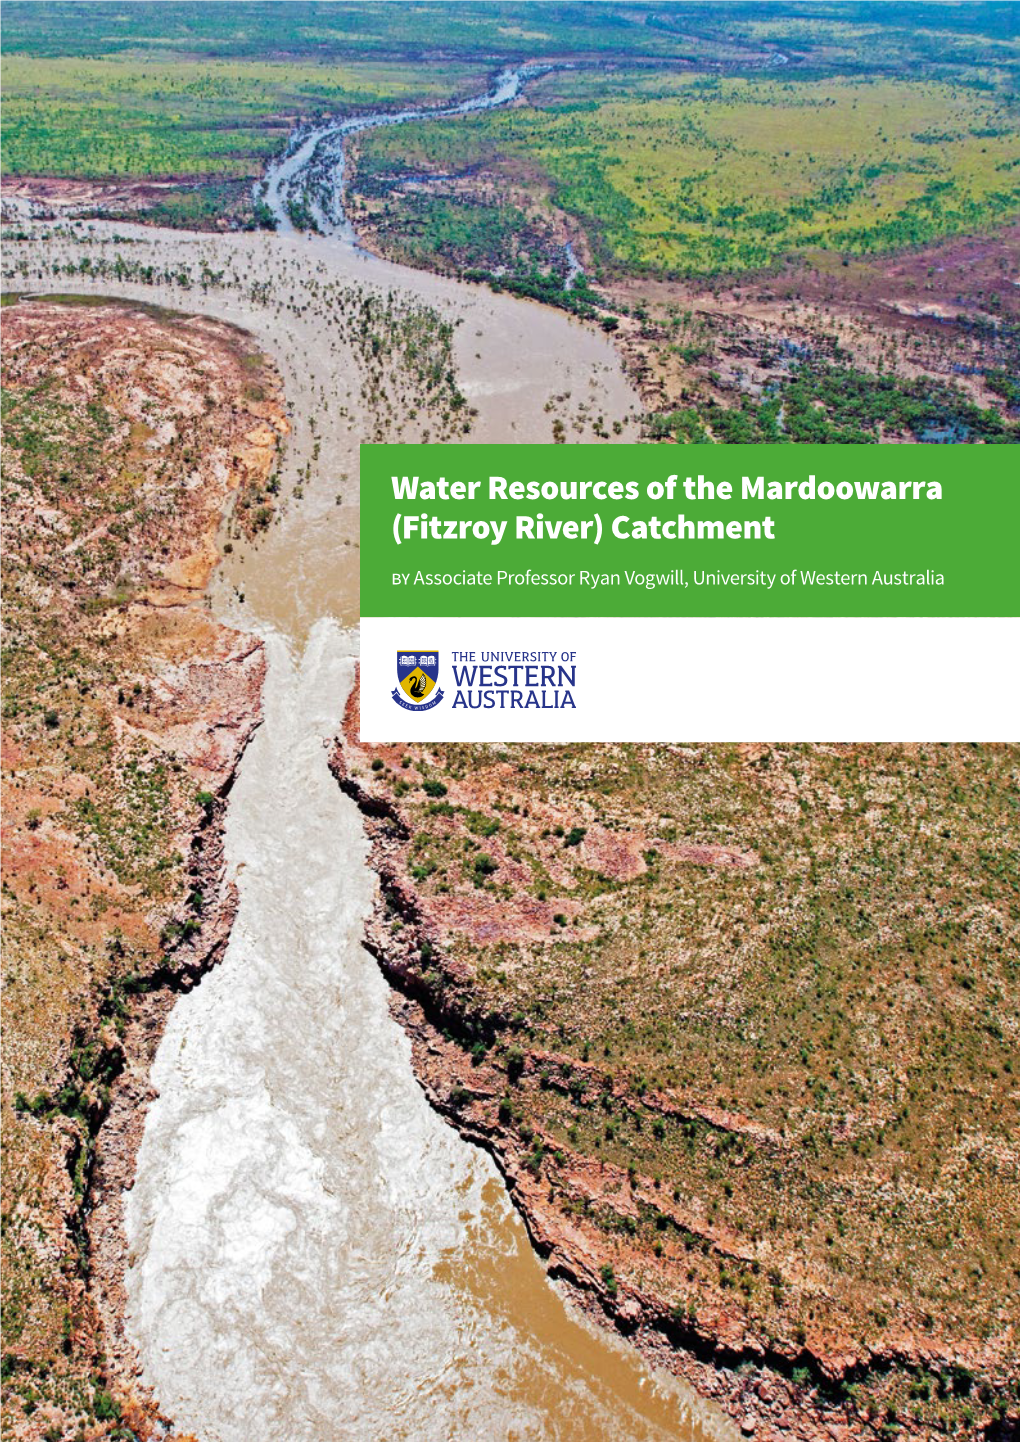 Fitzroy River) Catchment by Associate Professor Ryan Vogwill, University of Western Australia Acknowledgments